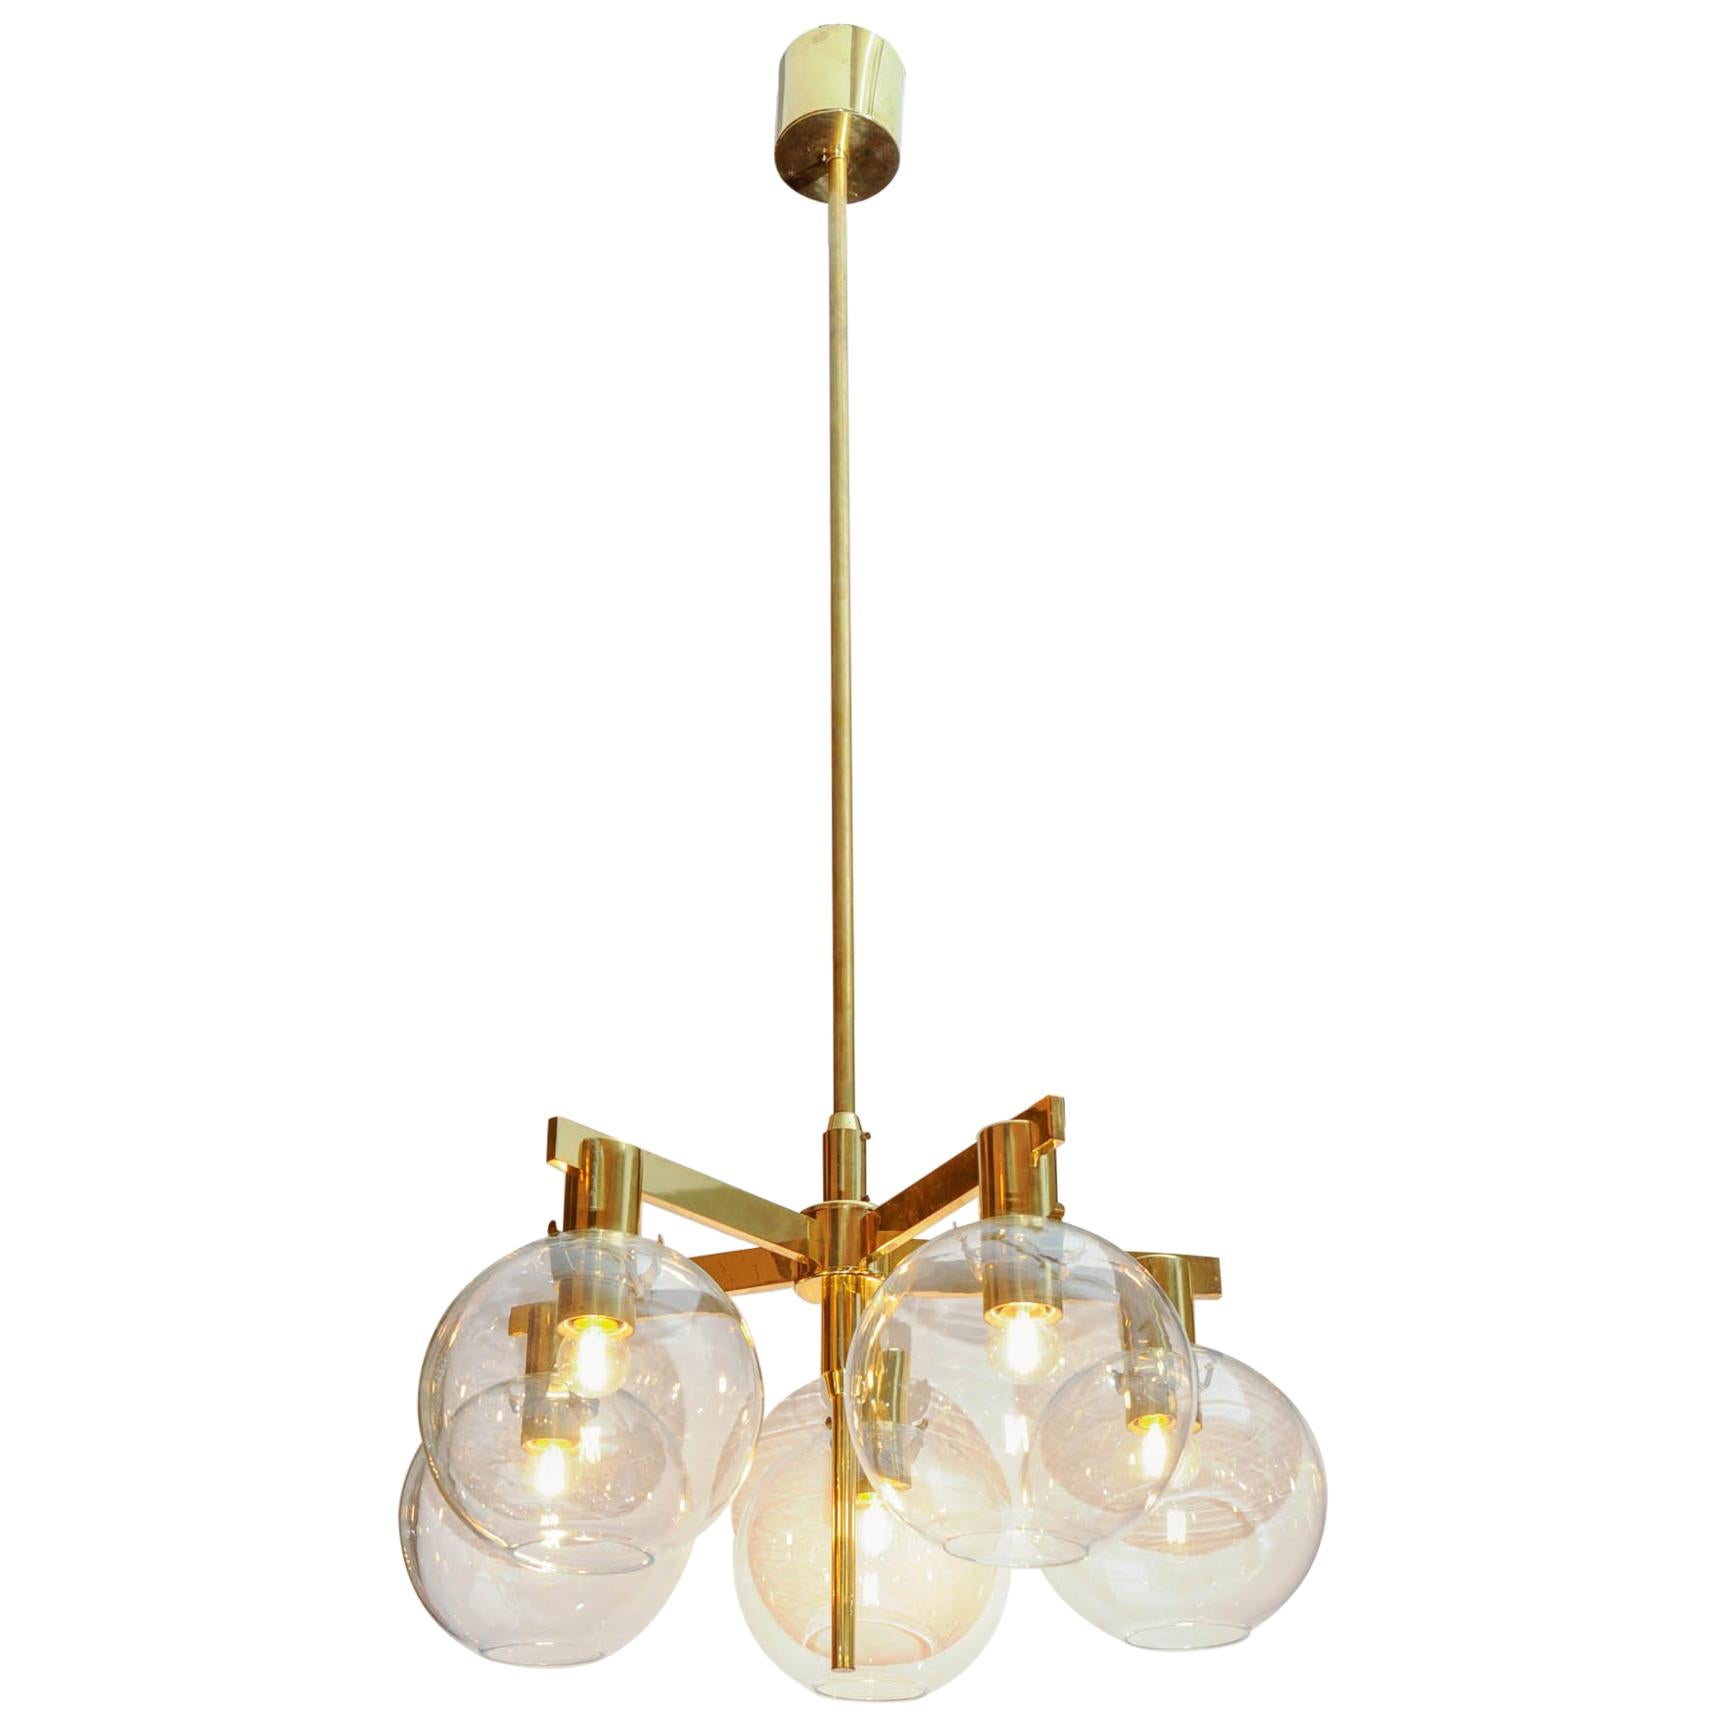 Pair of Brass and Glass Five Lights Chandeliers by Hans Agne Jakobsson